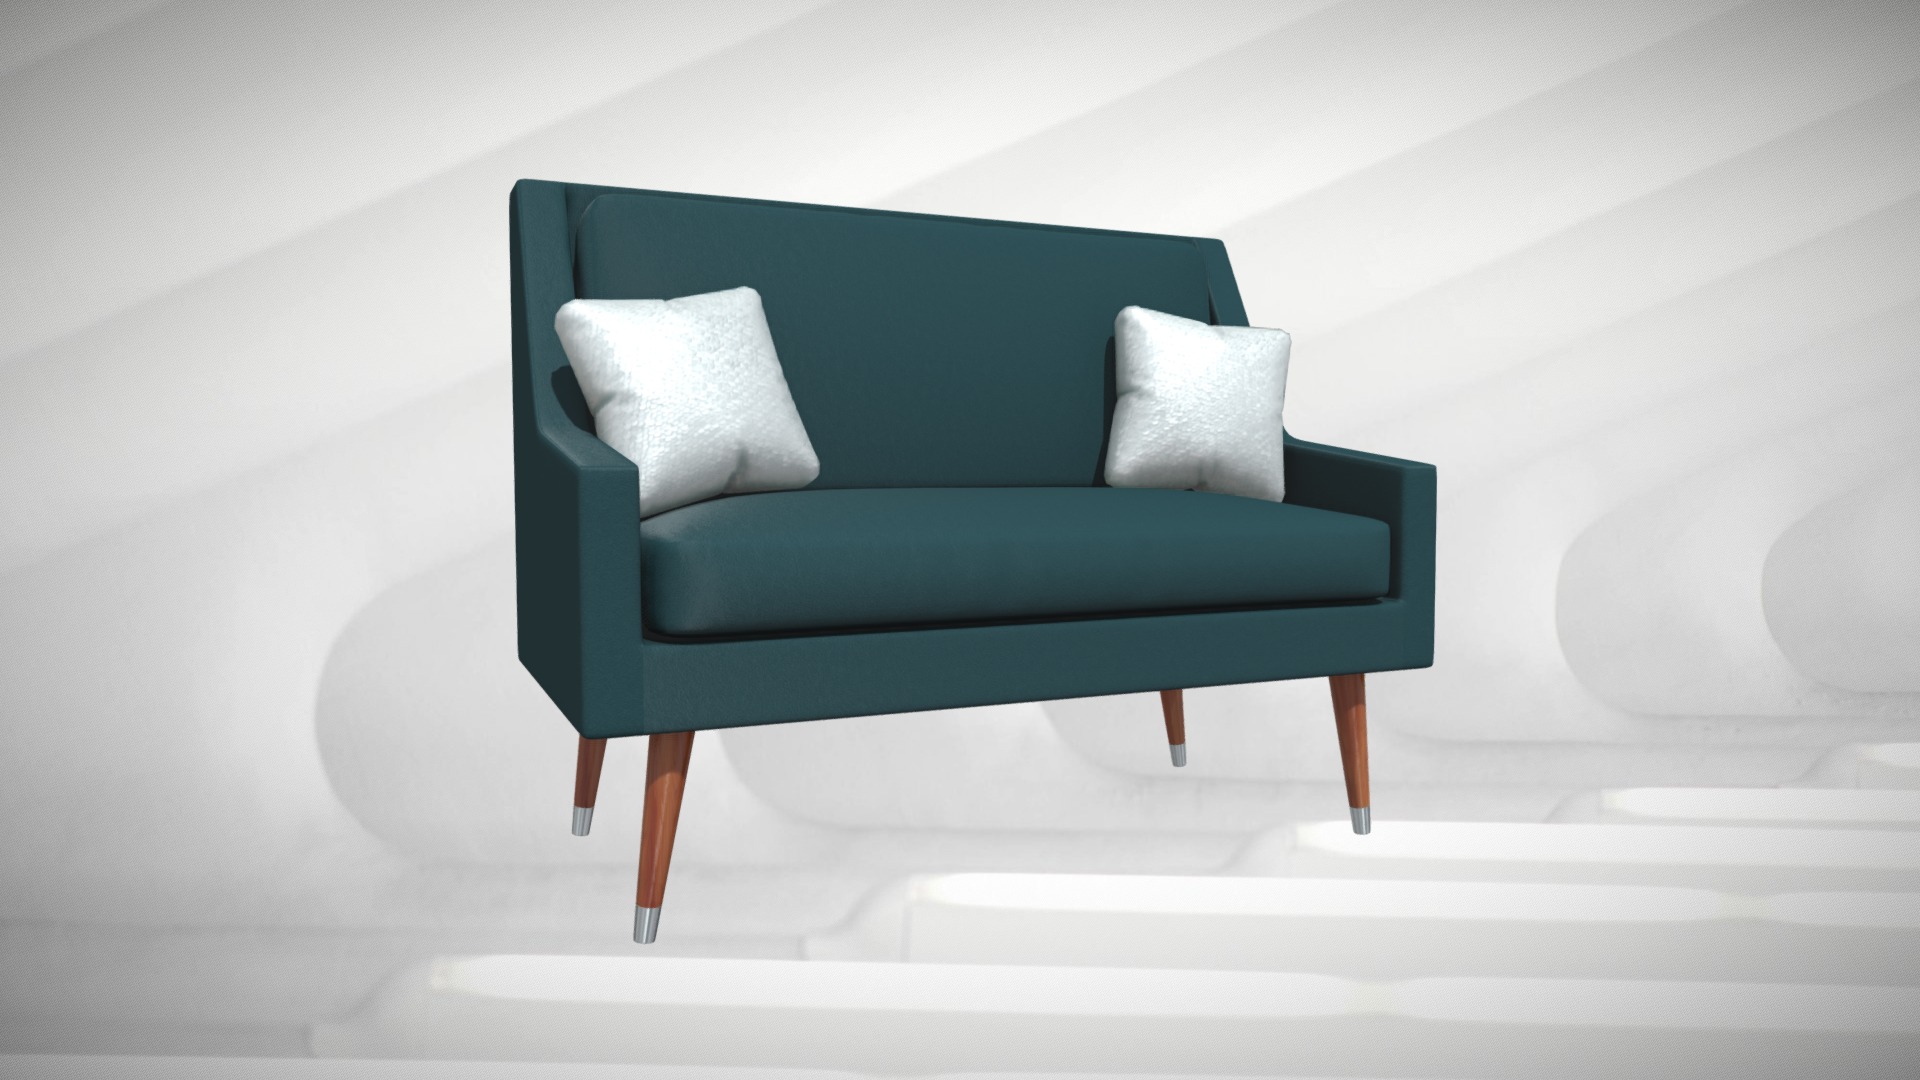 3D model Modern Settee Sofa Chair - This is a 3D model of the Modern Settee Sofa Chair. The 3D model is about a blue chair with white pillows.